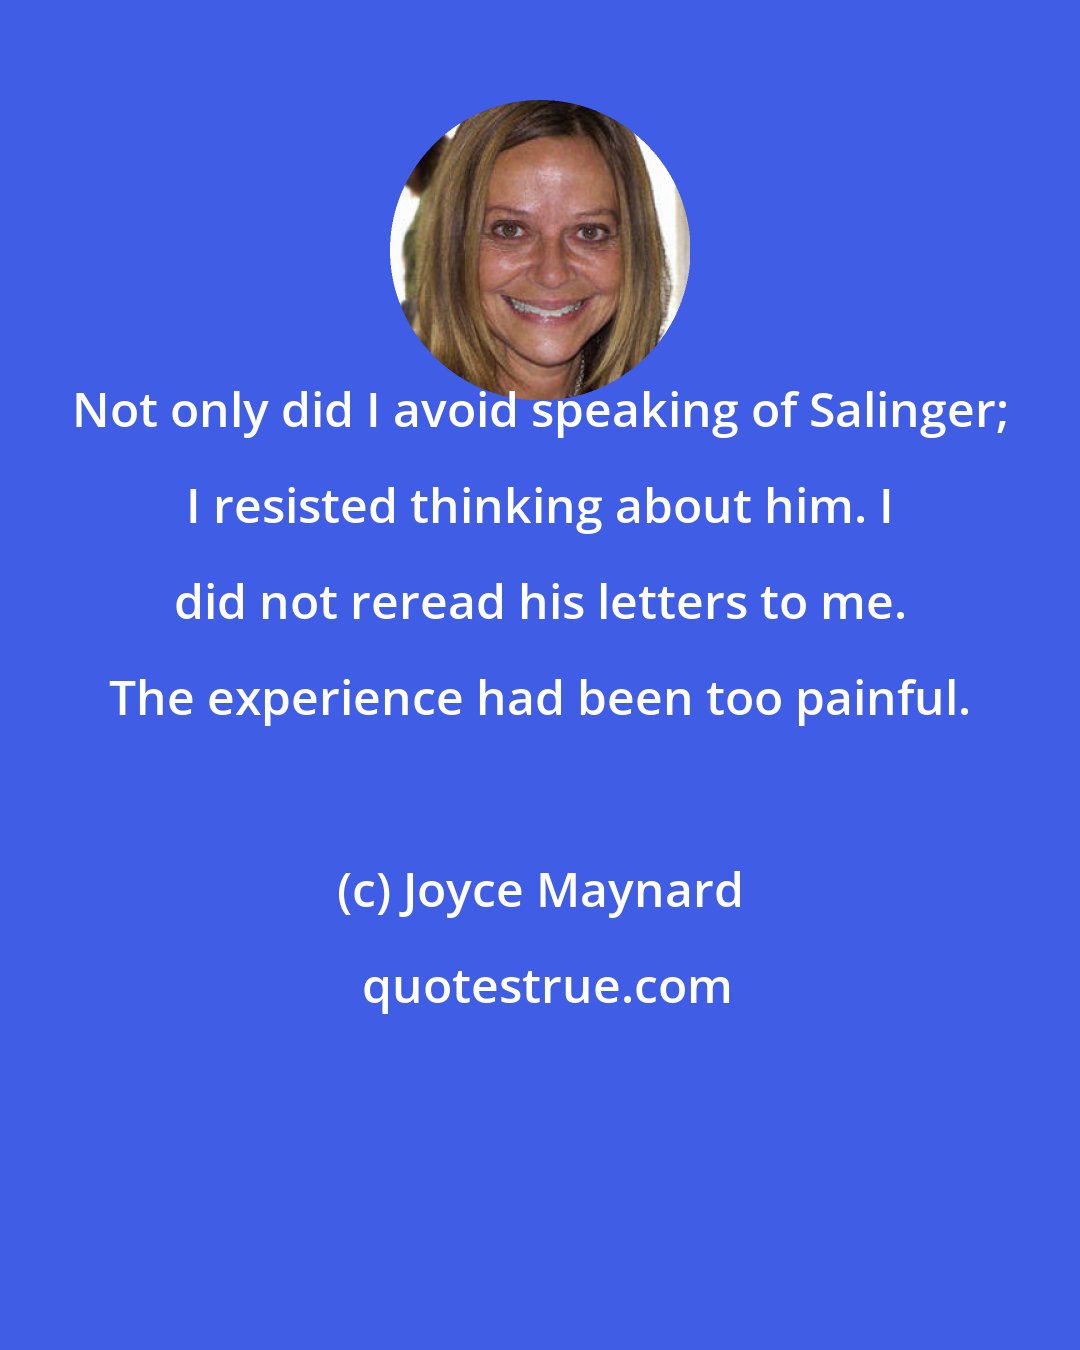 Joyce Maynard: Not only did I avoid speaking of Salinger; I resisted thinking about him. I did not reread his letters to me. The experience had been too painful.